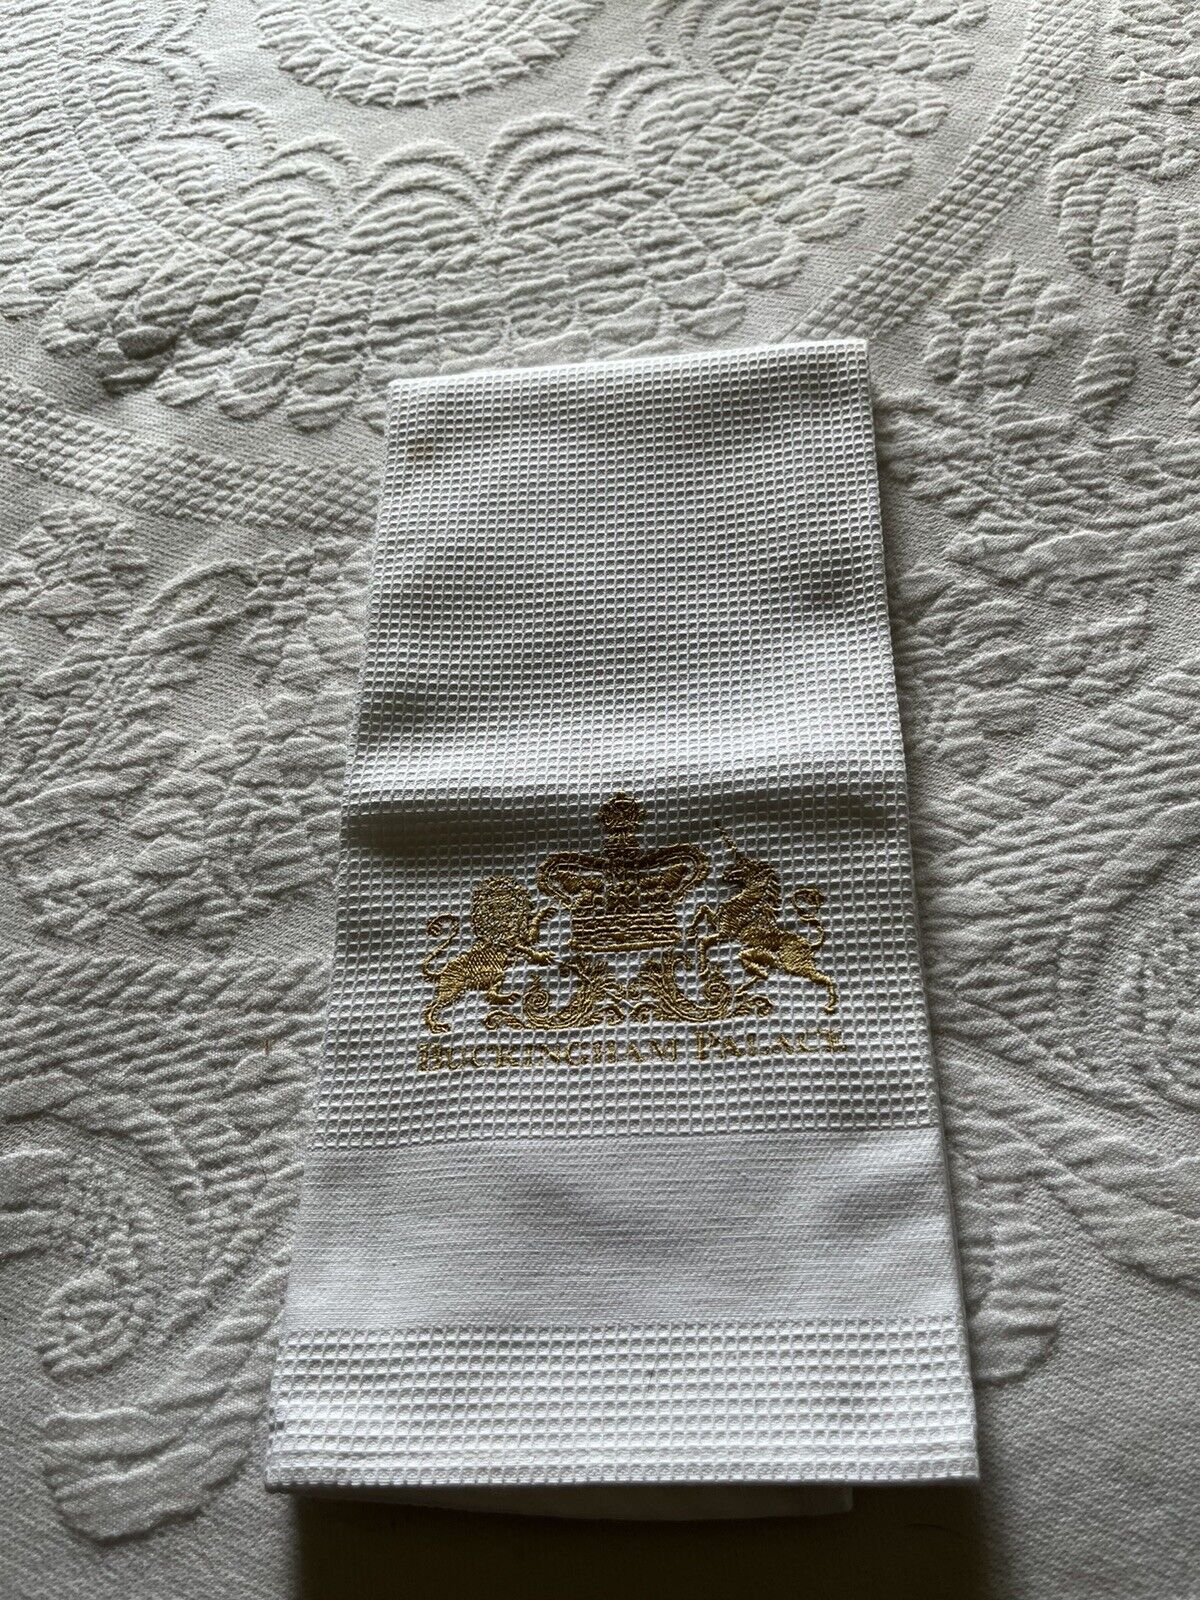 Vintage Buckingham Palace The Royal Collection Gold Embroidered White Tea Towel